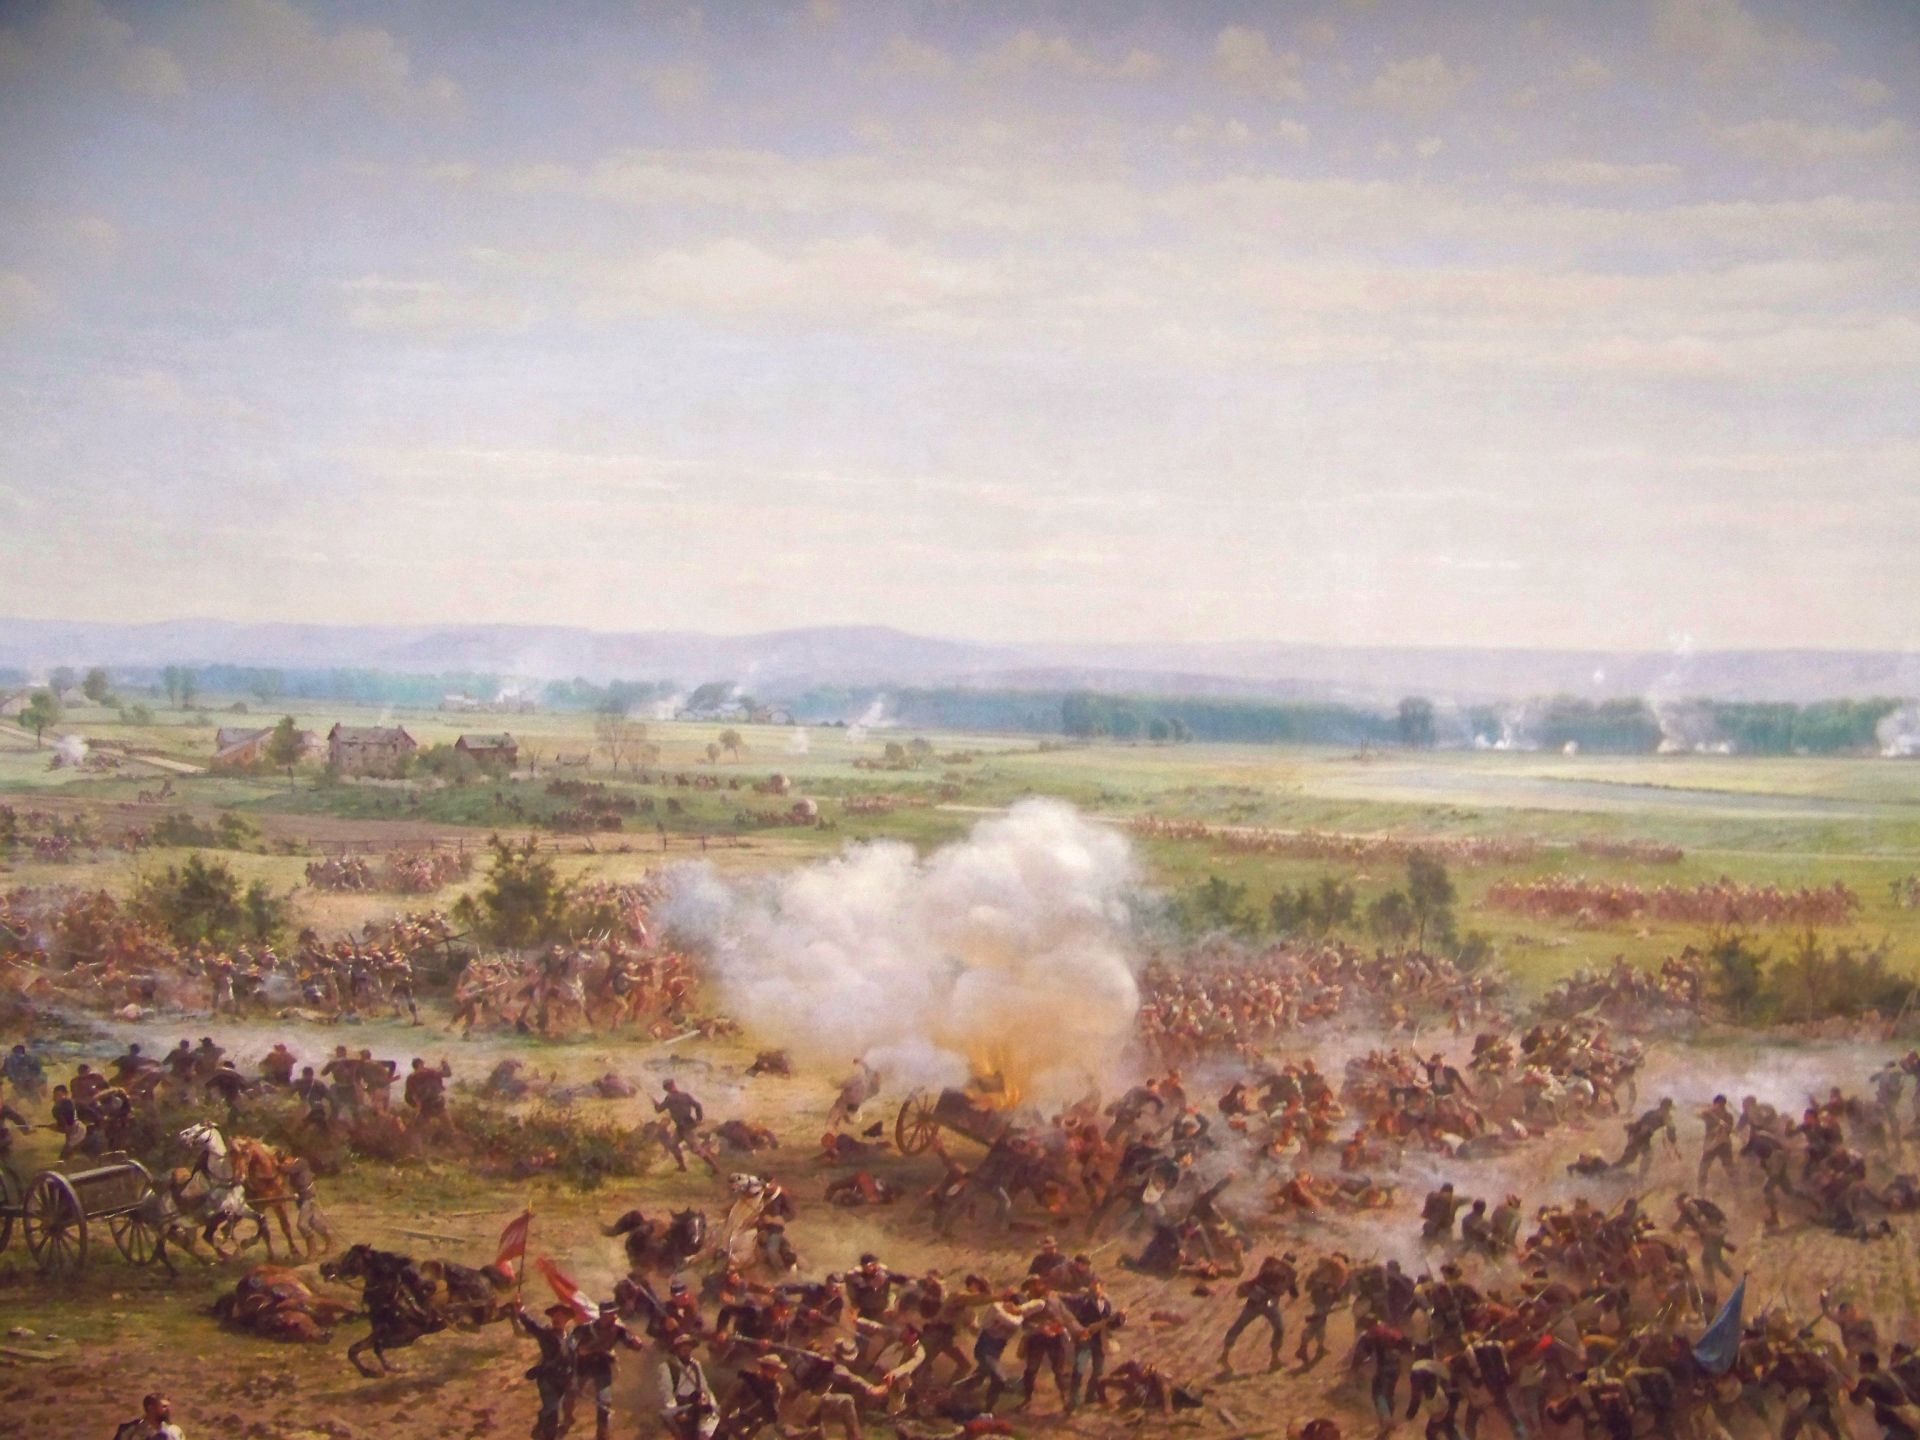 Pickett's Charge: A Scene from the Gettysburg Cyclorama (Author Photo)